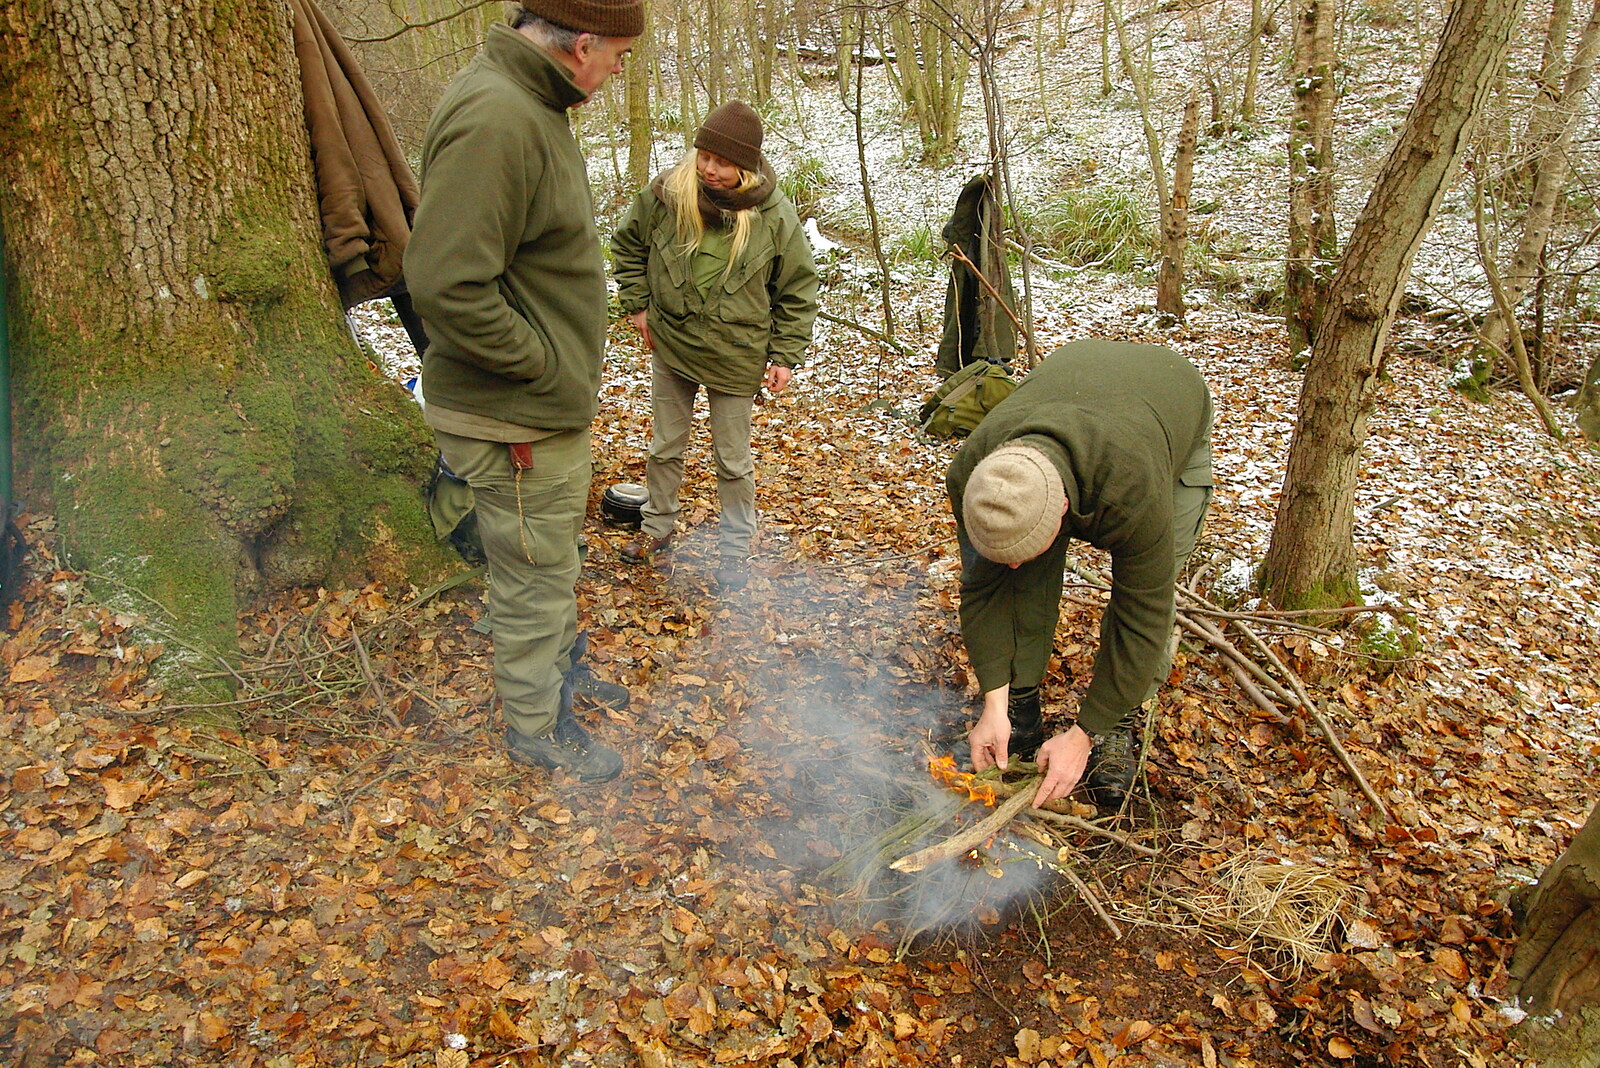 The Woodlore team's fire is going from Walk Like a Shadow: A Day With Ray Mears, Ashdown Forest, East Sussex - 29th December 2005